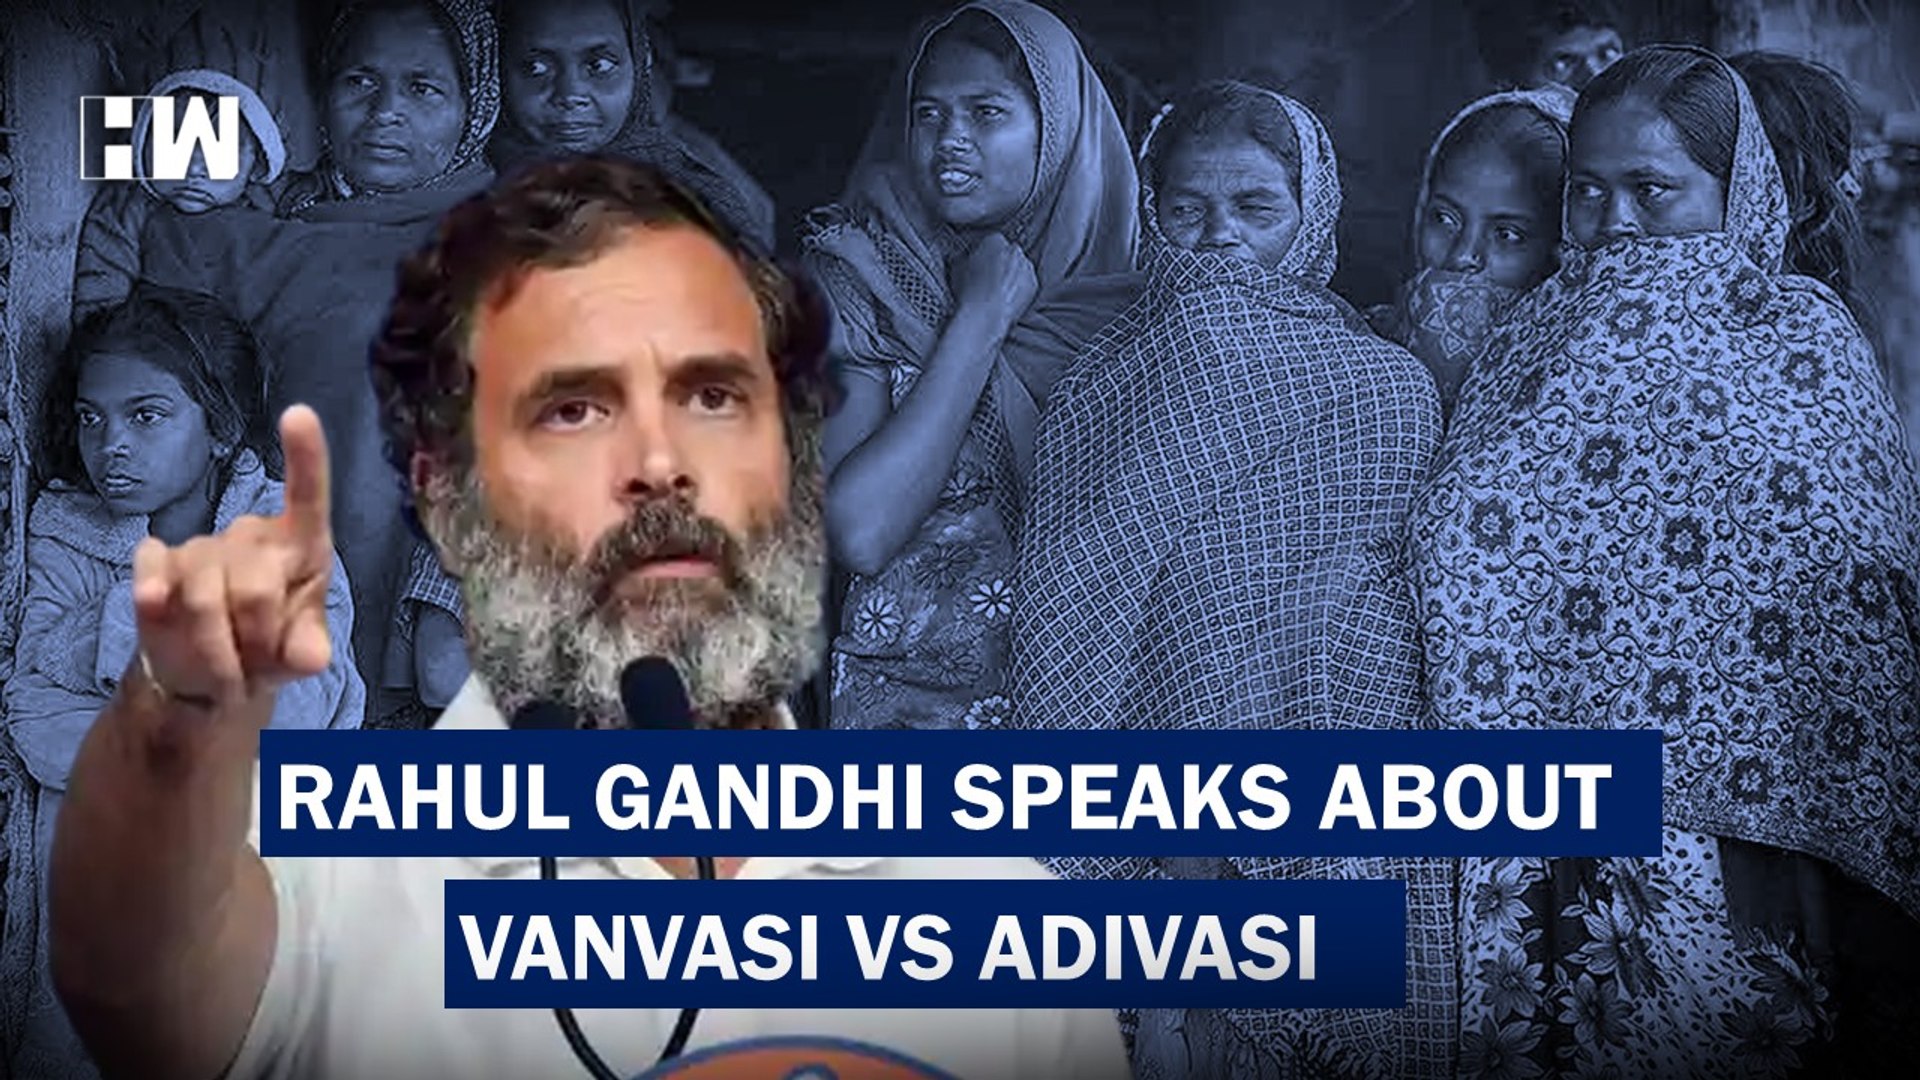 Adivasi' vs 'Vanvasi' Rahul Gandhi Says BJP Wants To Finish Off Tribals By Denying Rights - video Dailymotion